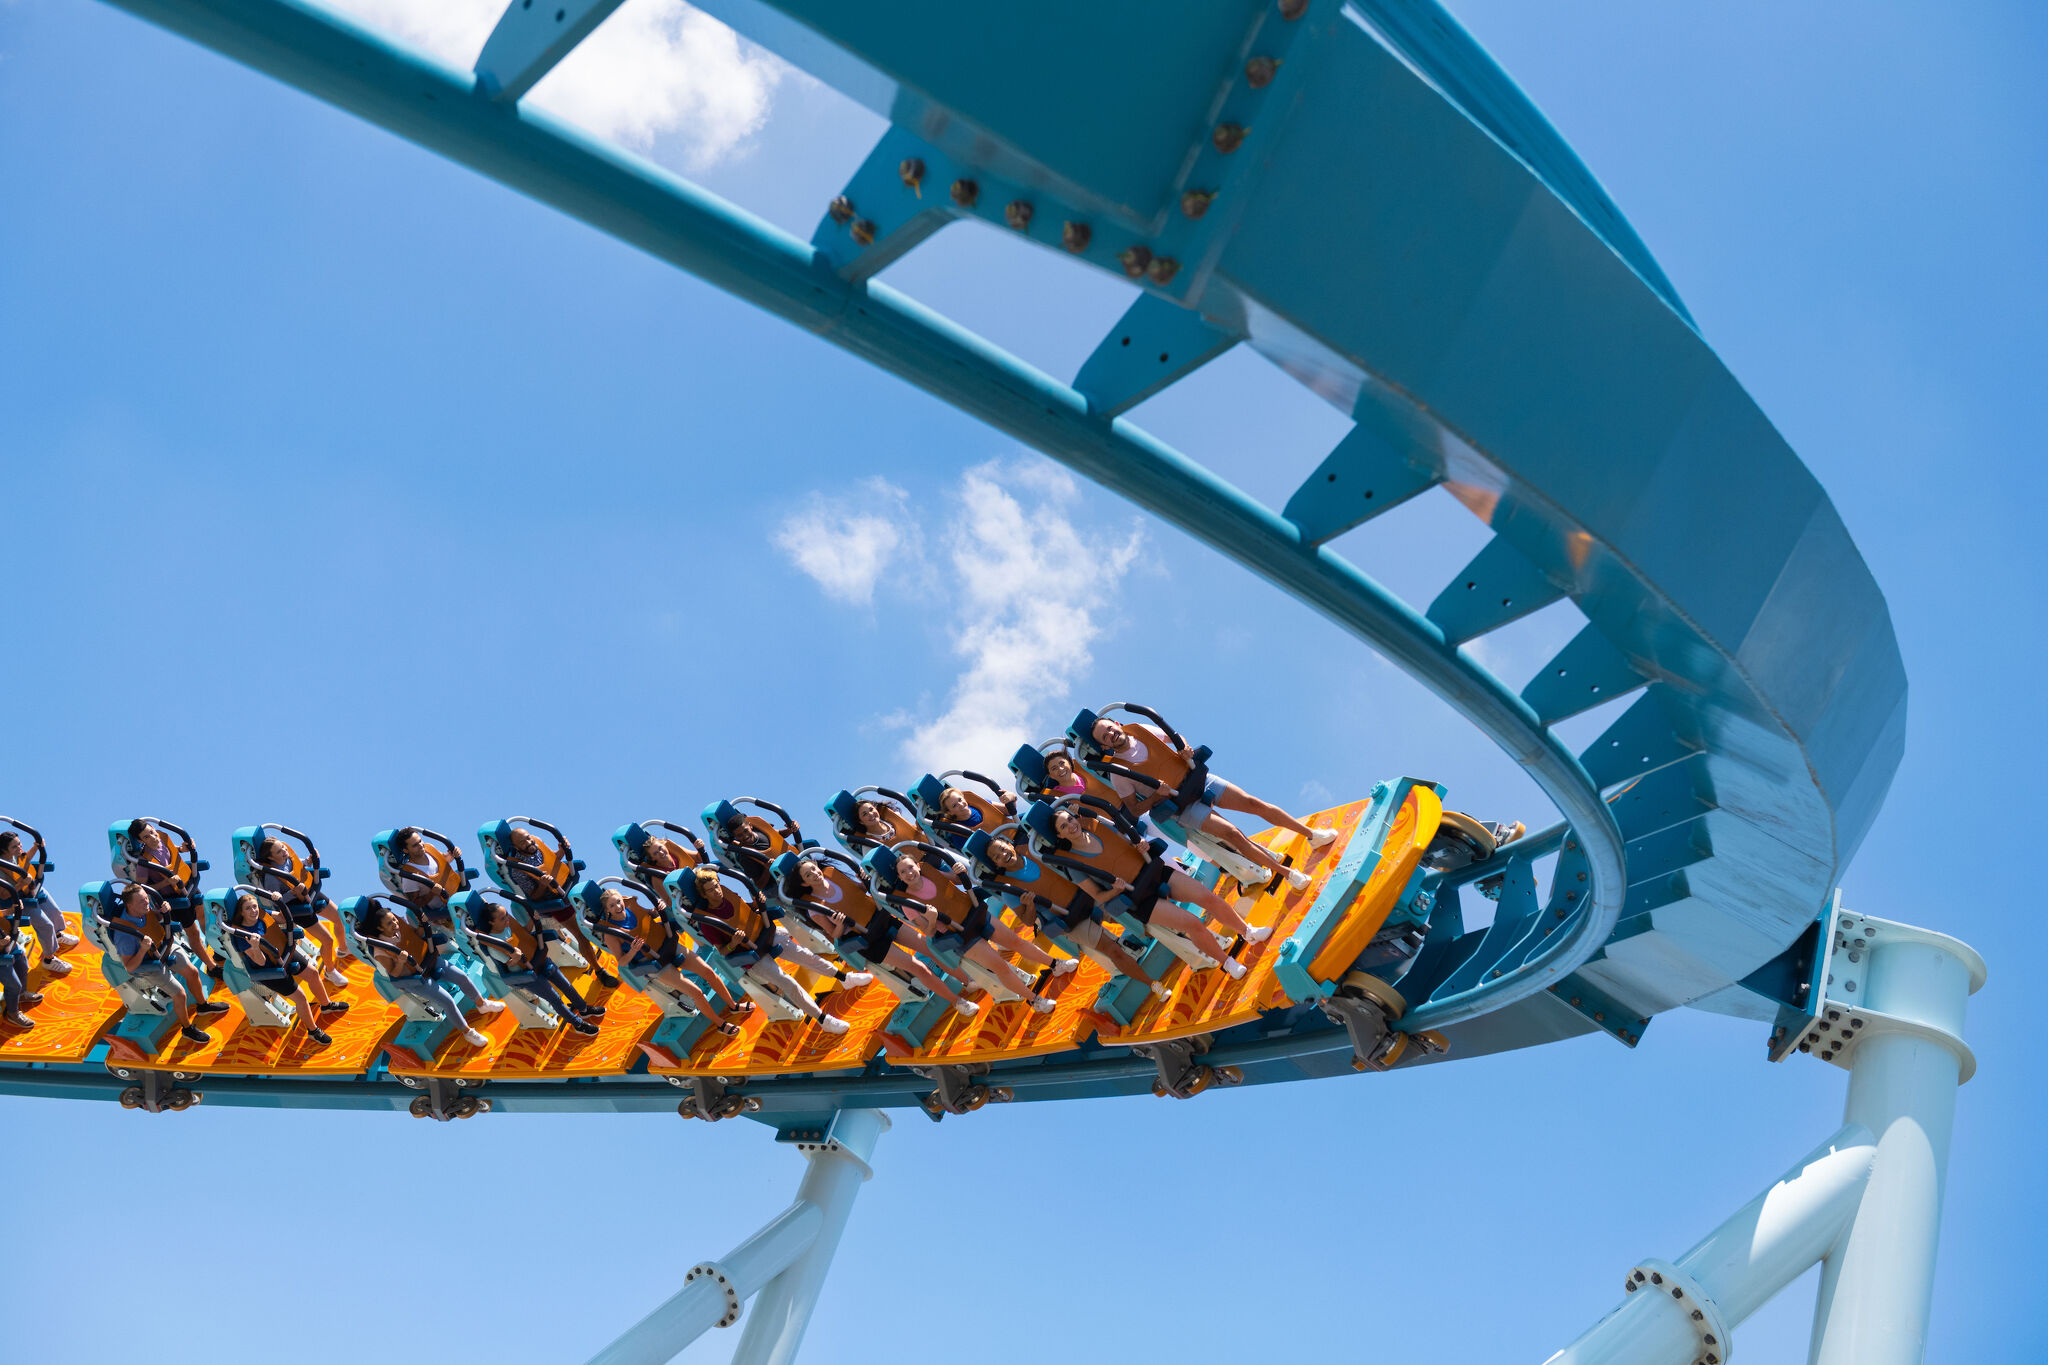 Thrills or Chills? Roller Coaster Safety a Mystery